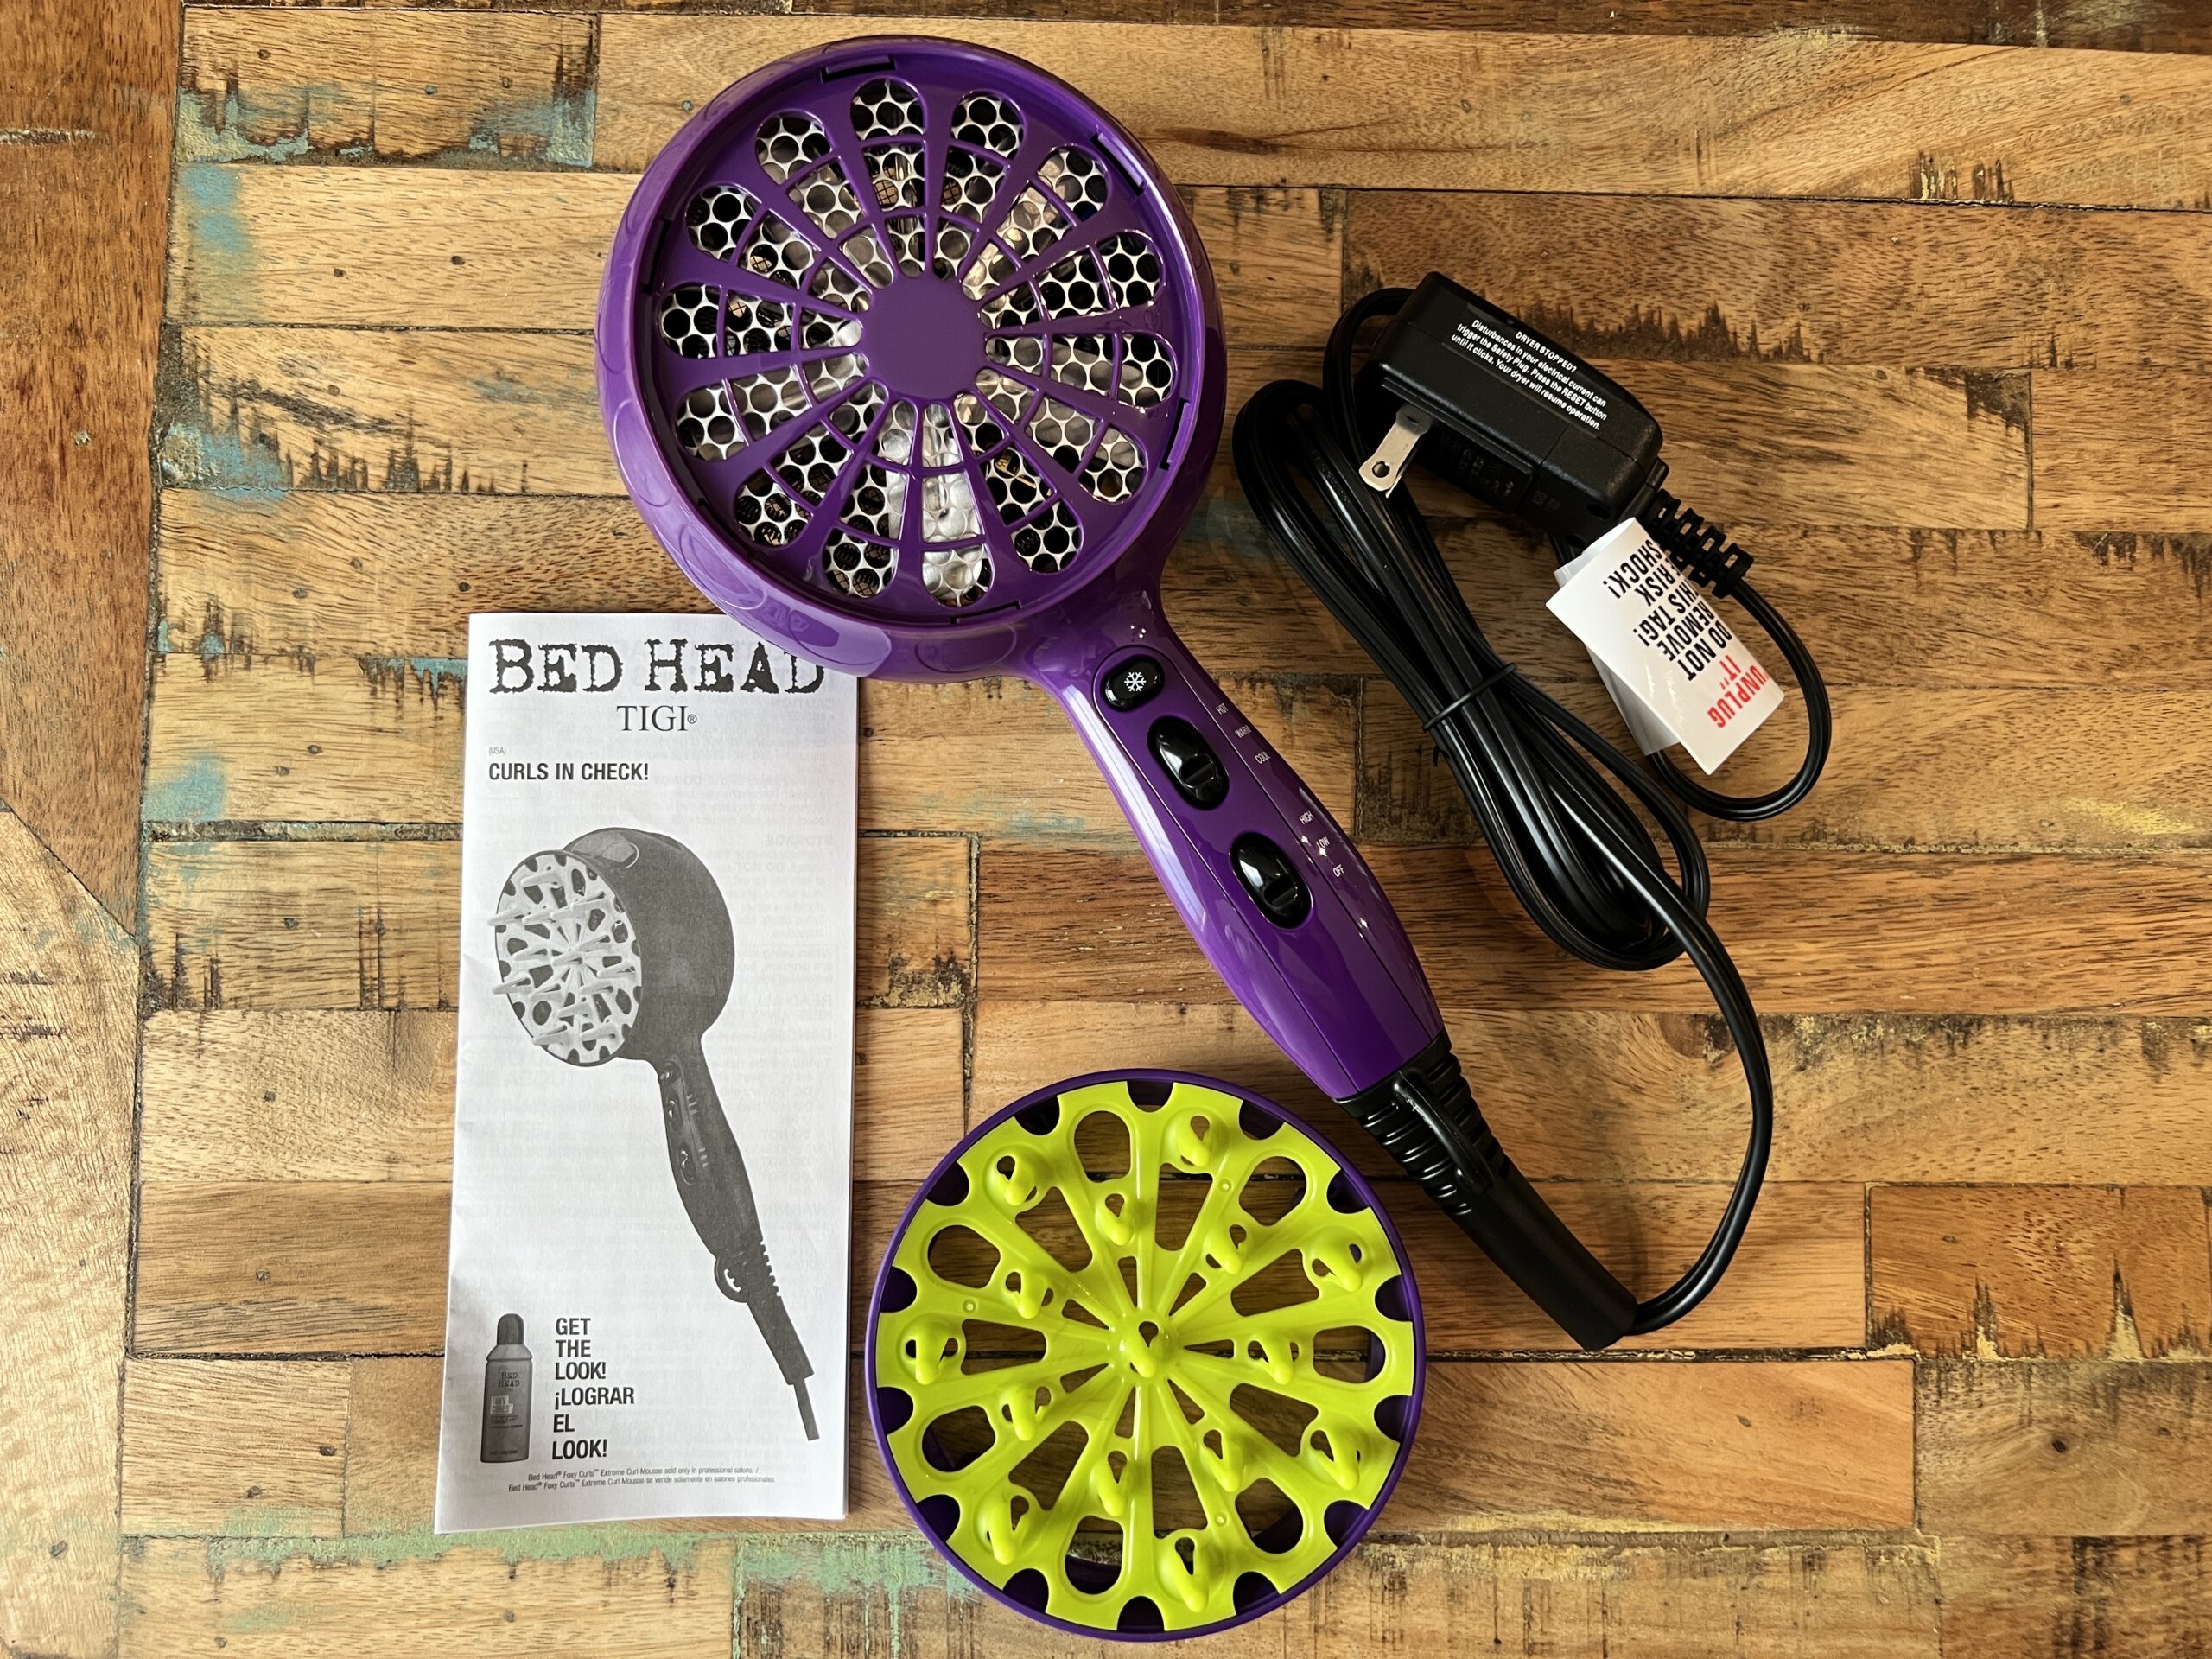 The Bed Head TIGI 1875-watt tourmaline ionic diffuser dryer includes a detailed instruction manual in the box.